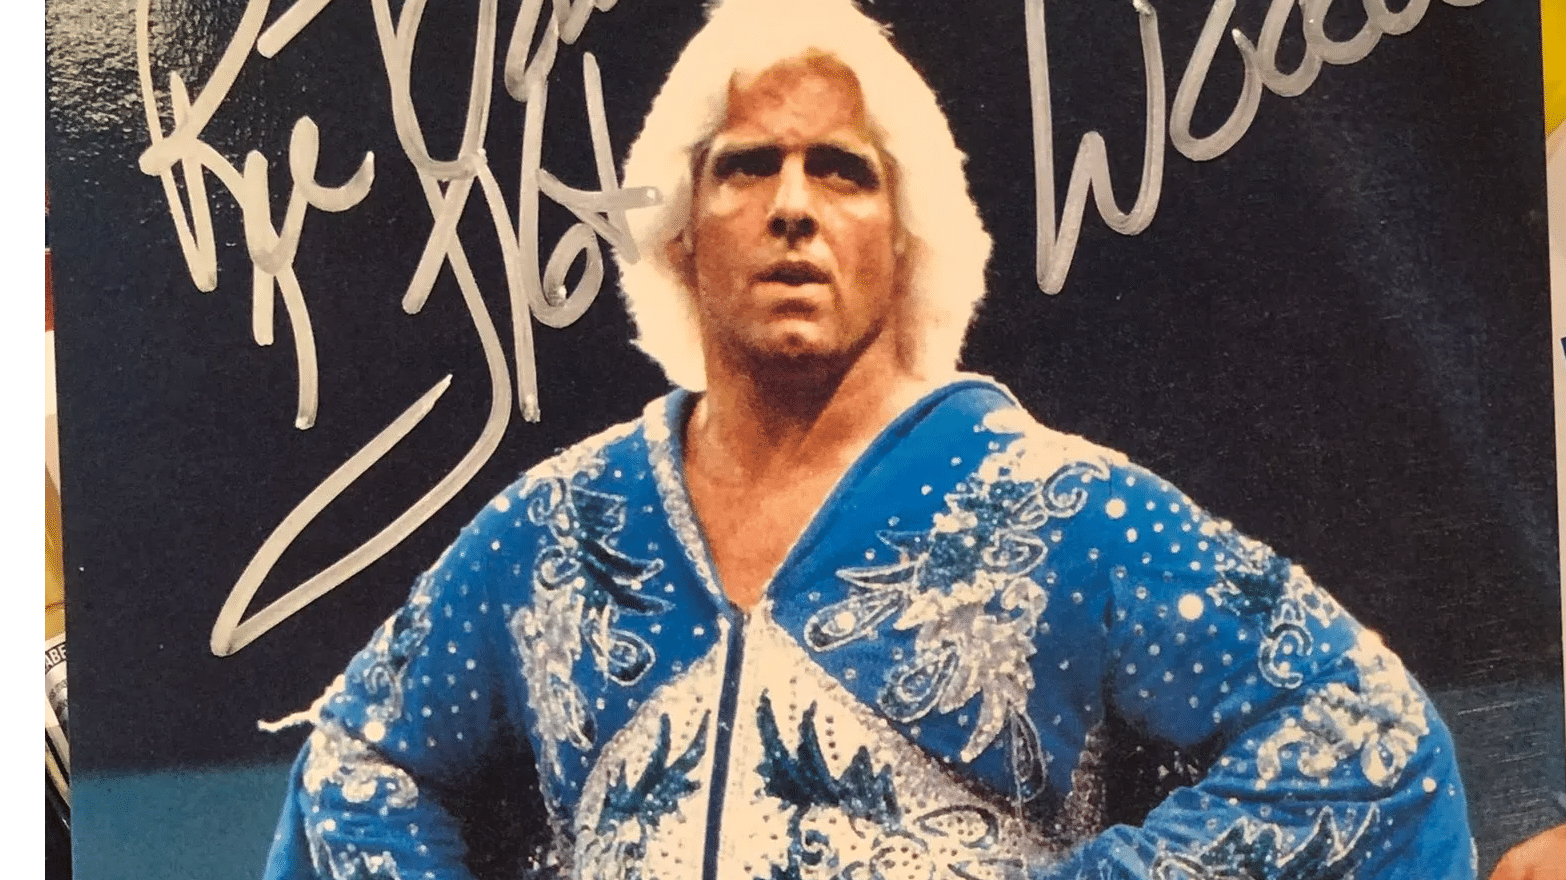 Who is Ric Flair?